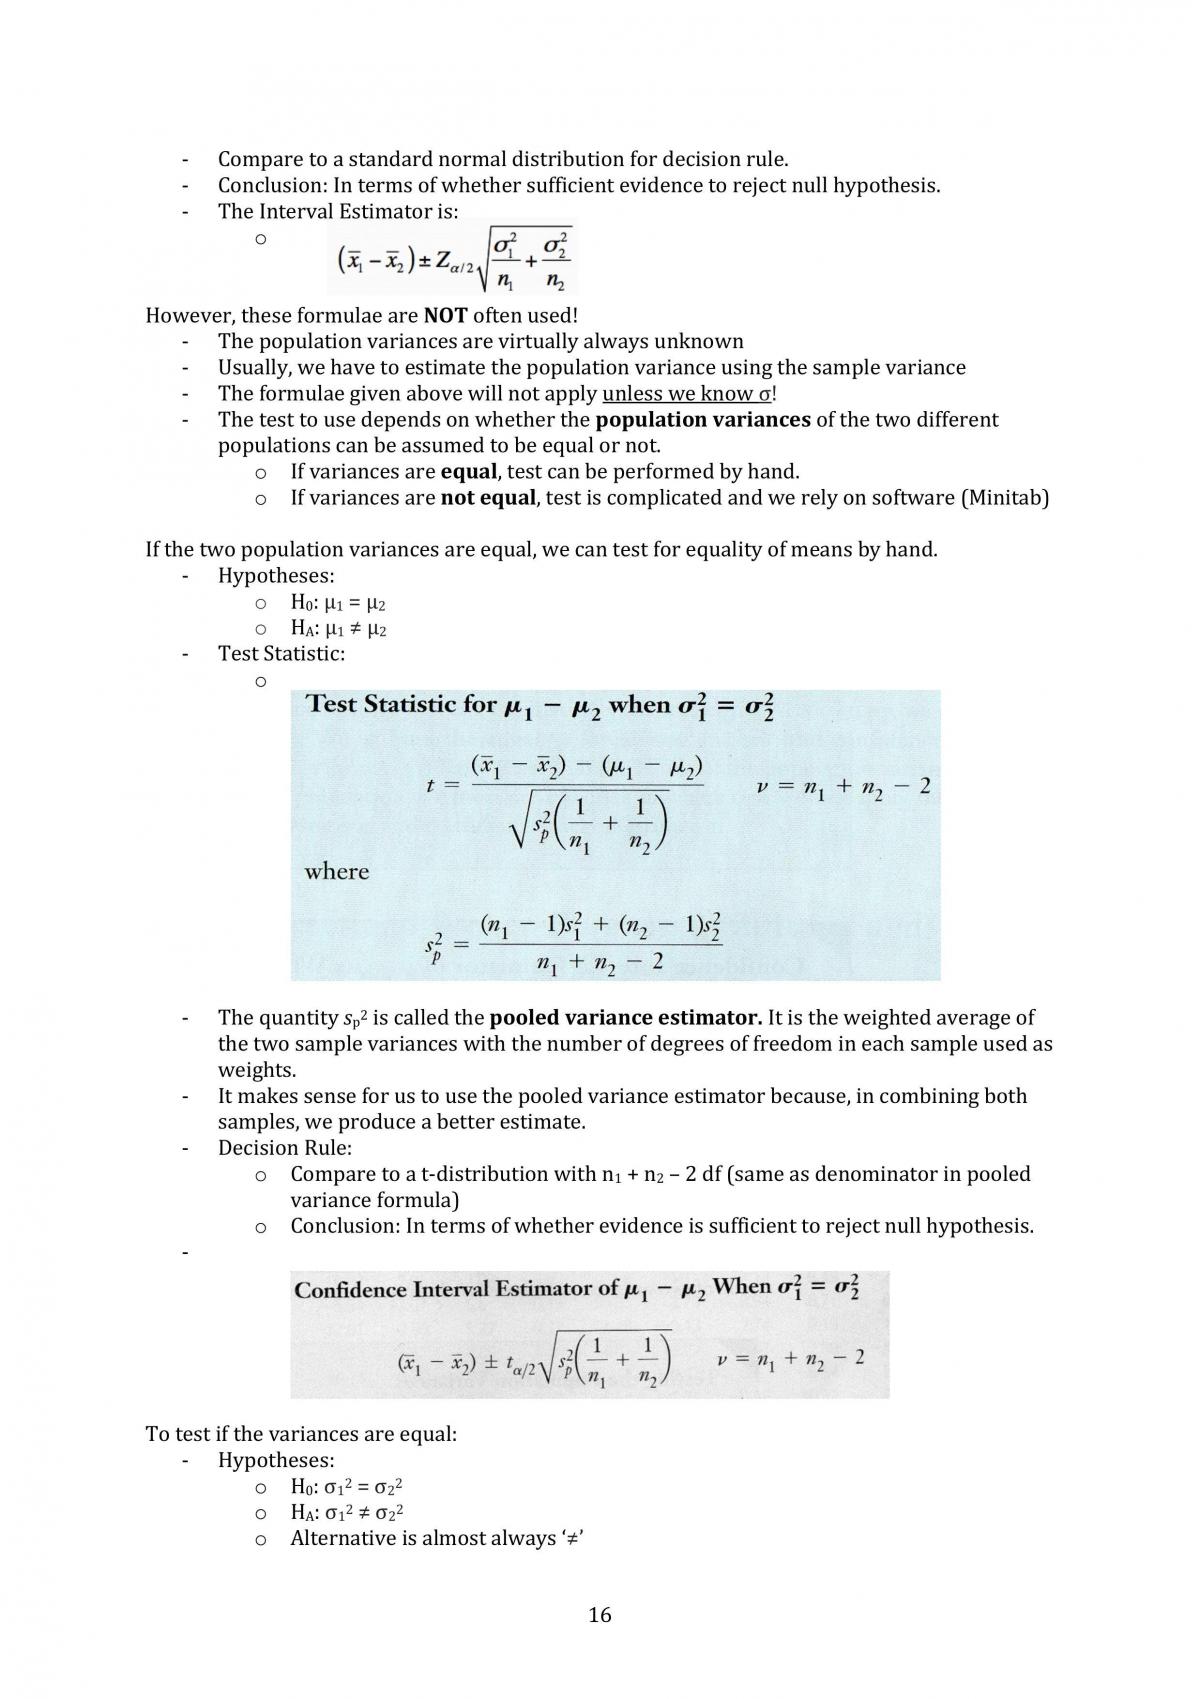 STAT1008 Notes - Page 16